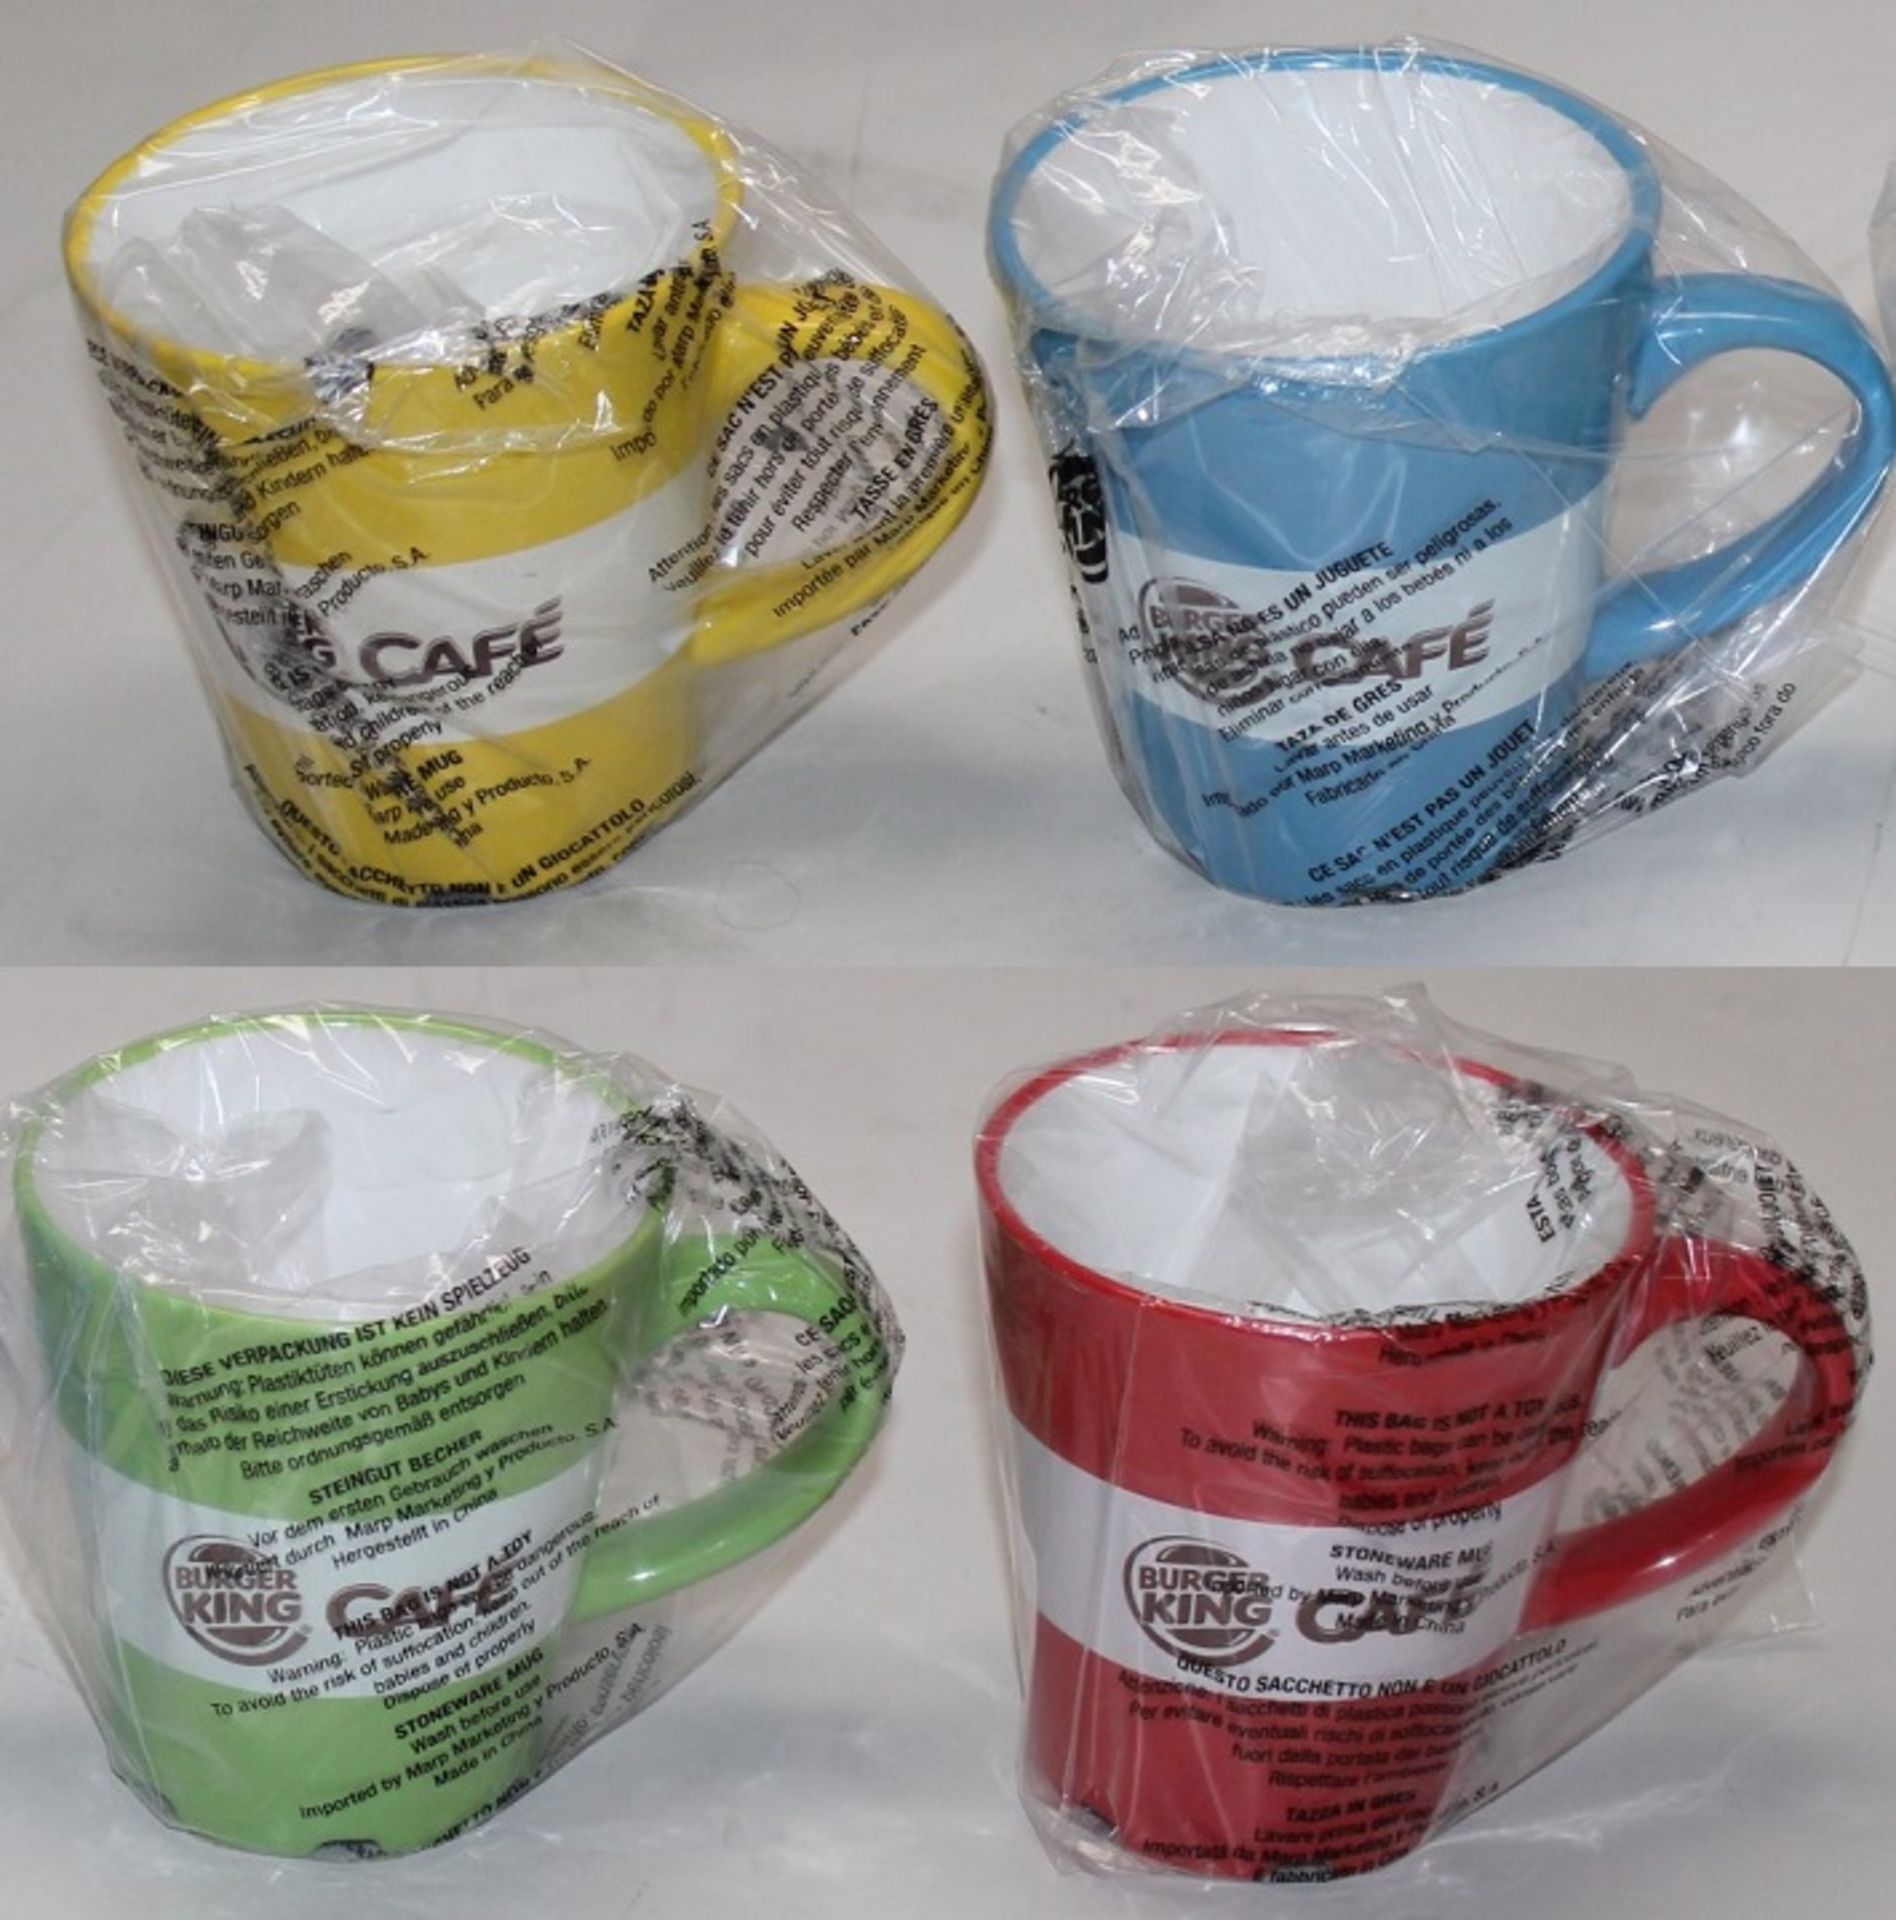 35 x Burger King Ceramic Coffee Mugs - Various Colours - Brand New Boxed Stock - CL011 - Location: